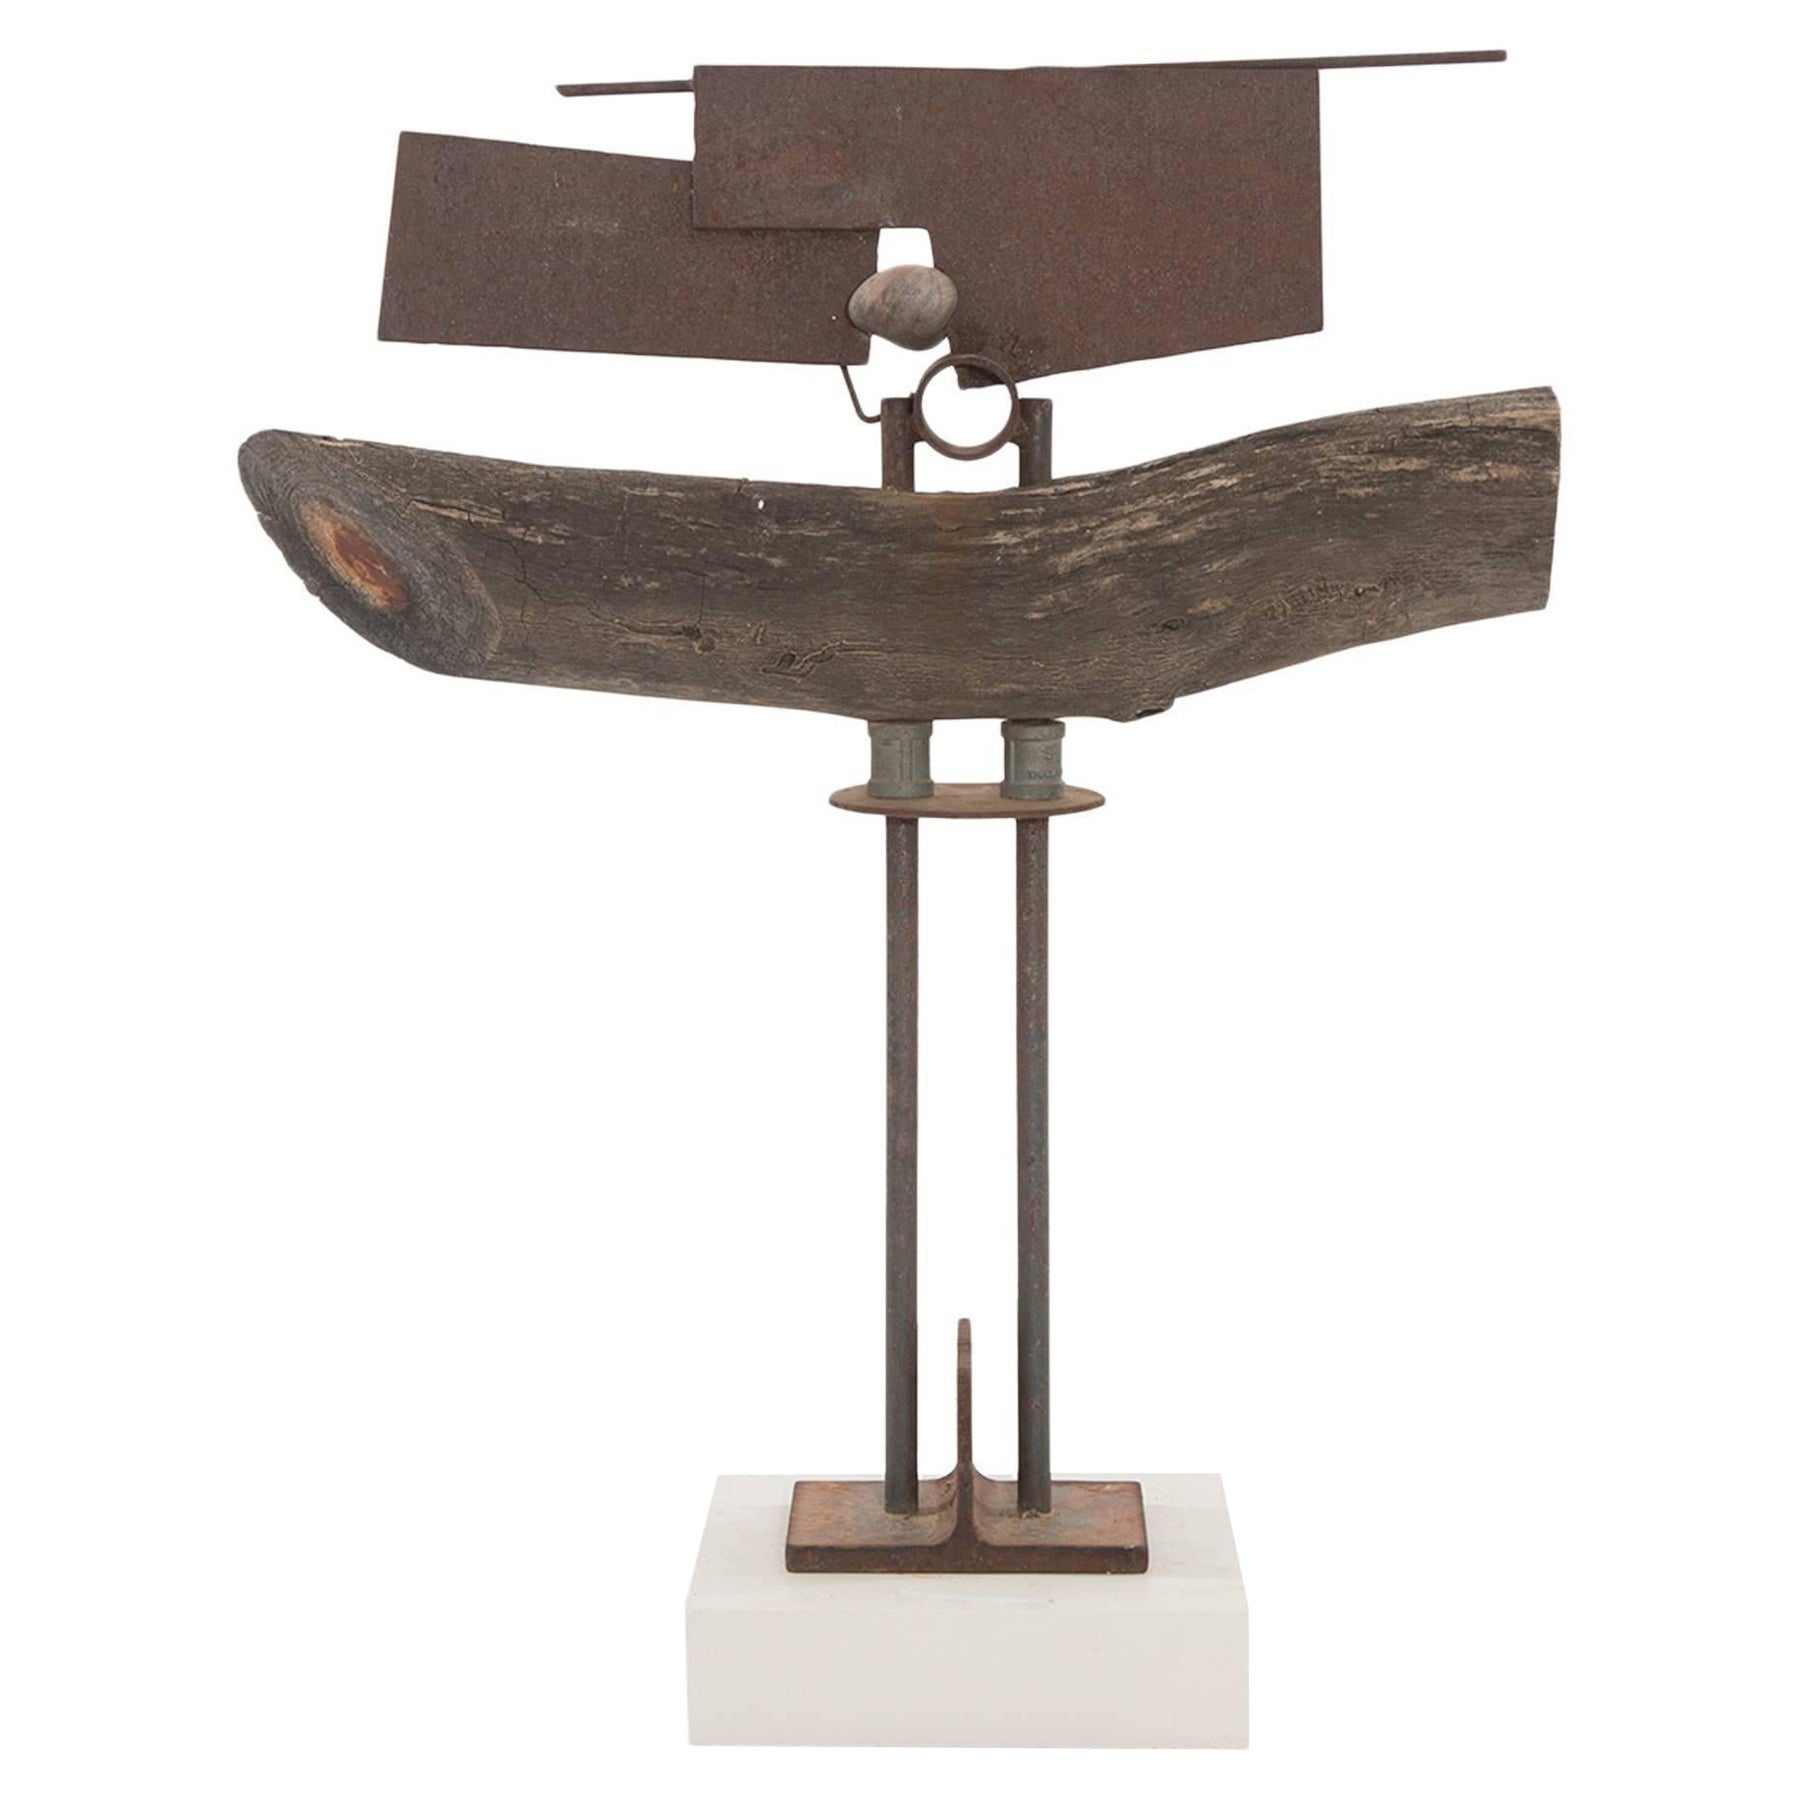 Rick Lussier Abstract Wood & Steel Brutalist Sculpture For Sale